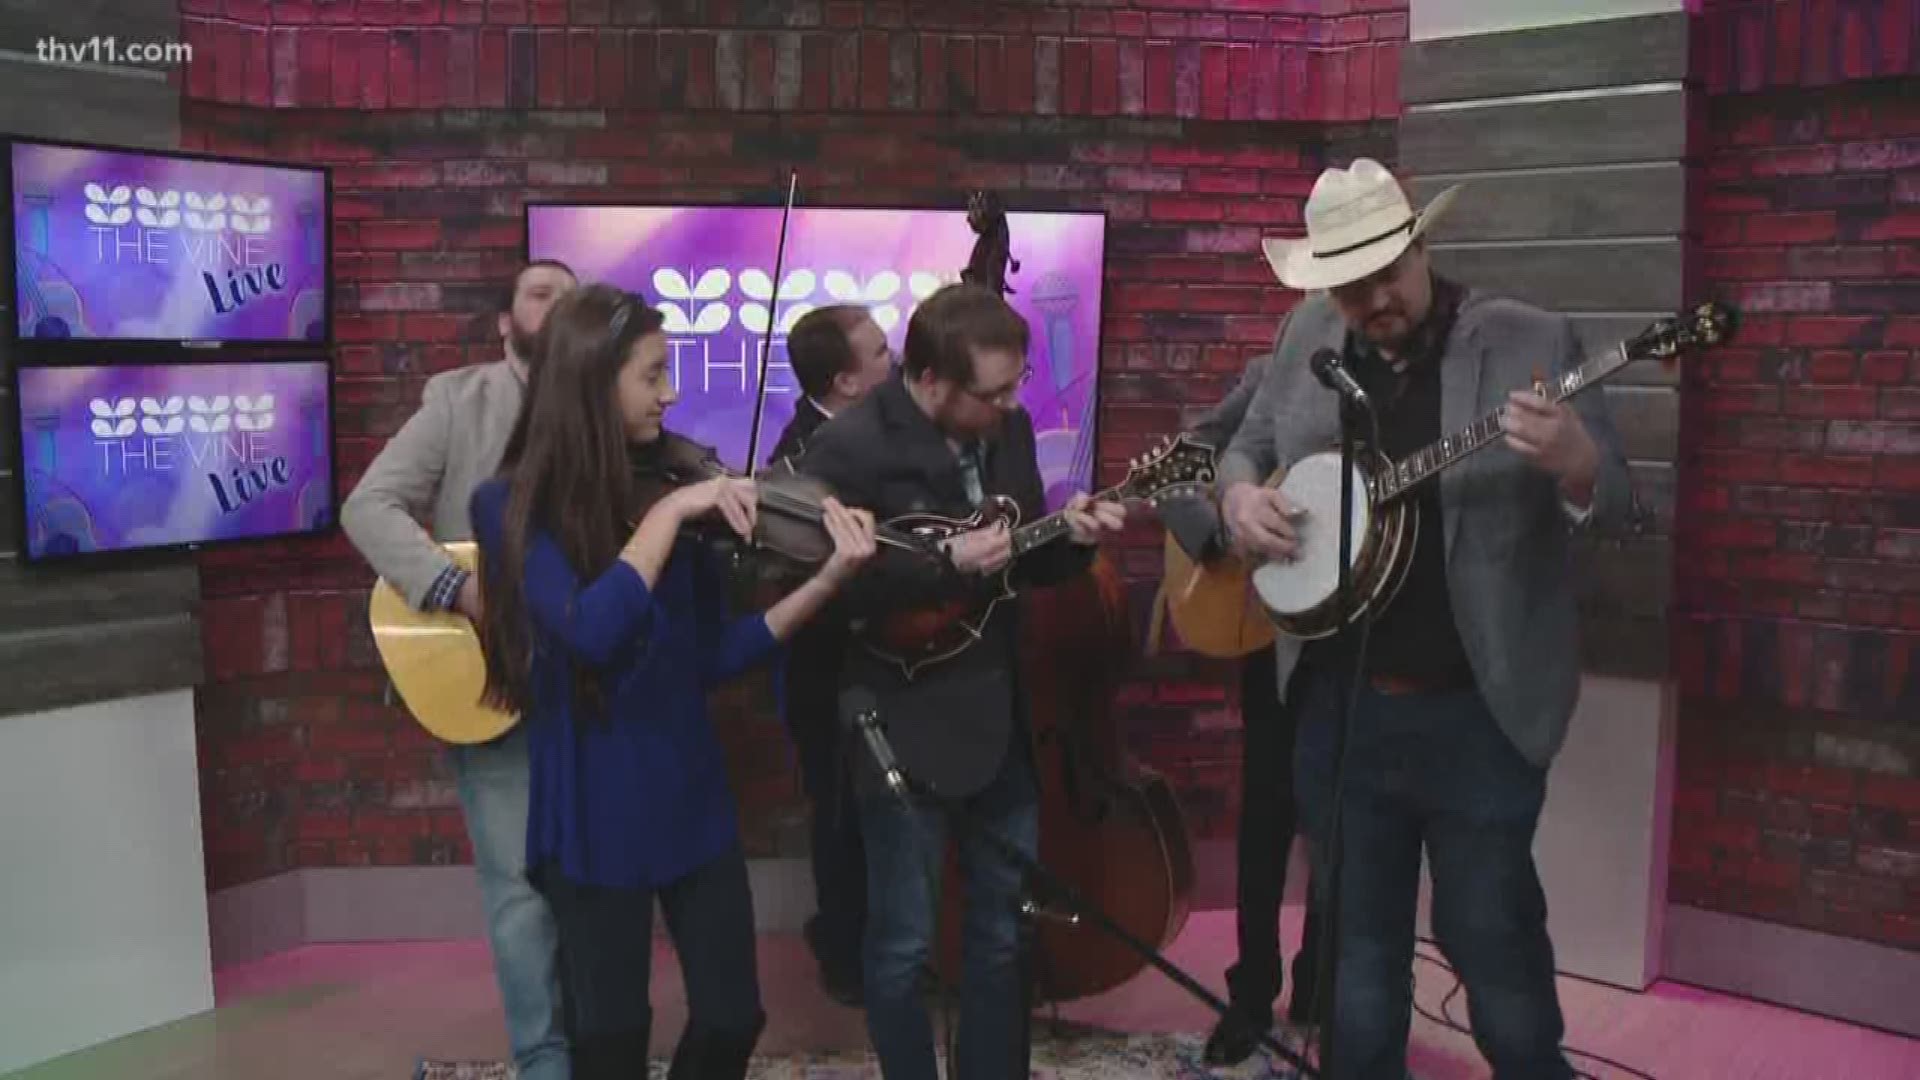 The Gravel Yard Bluegrass Band from Mountain View has some impressive members (including a 14-year-old!)